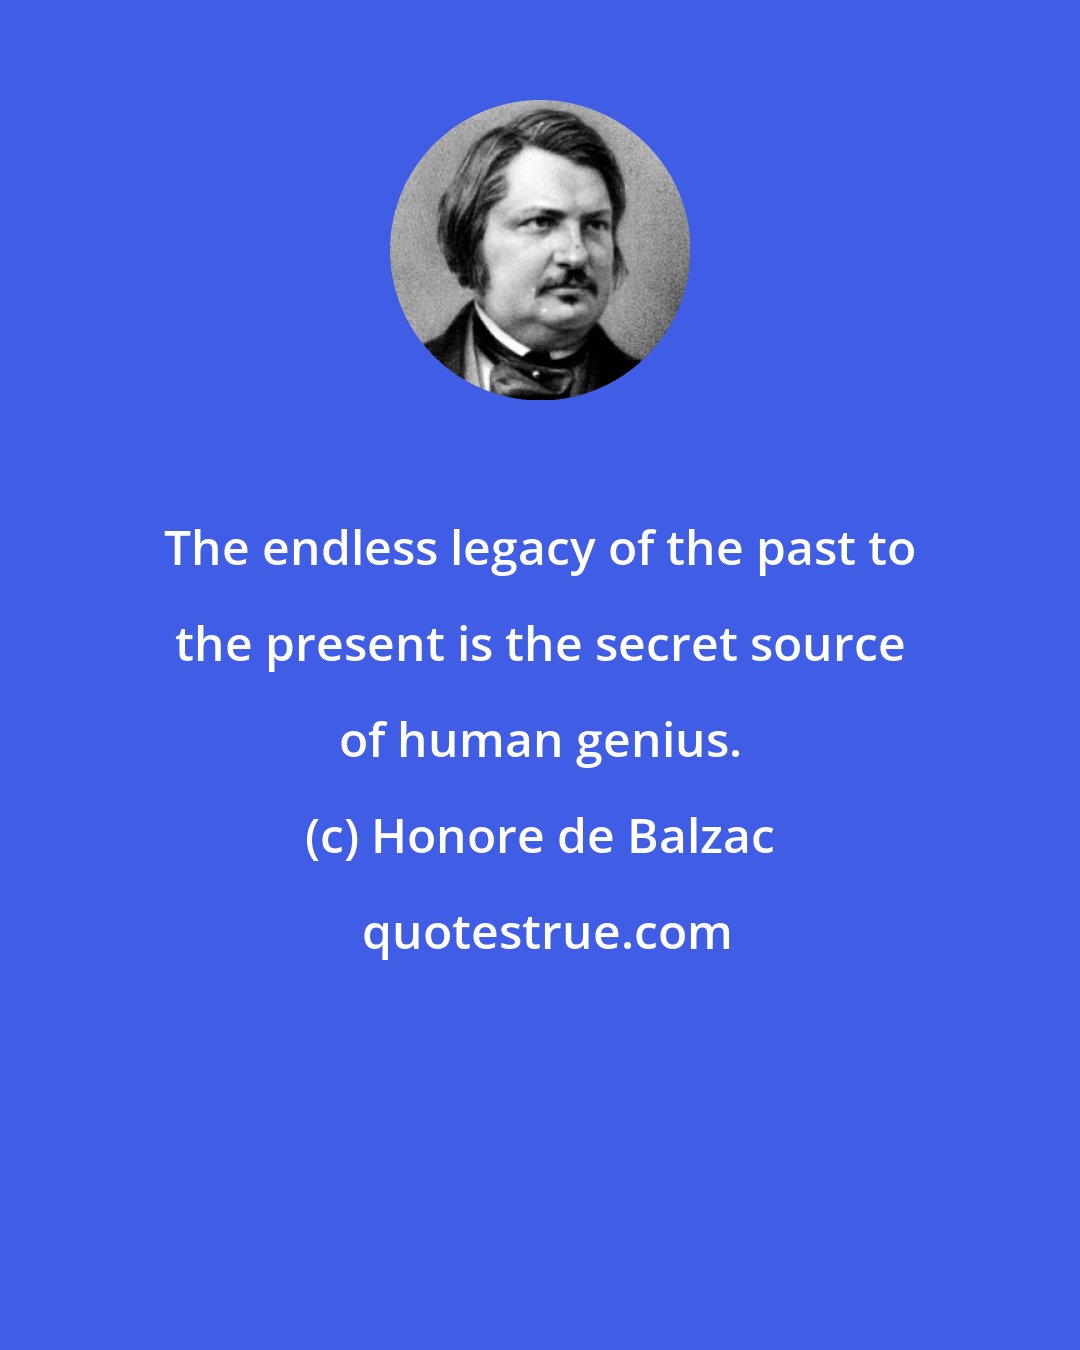 Honore de Balzac: The endless legacy of the past to the present is the secret source of human genius.